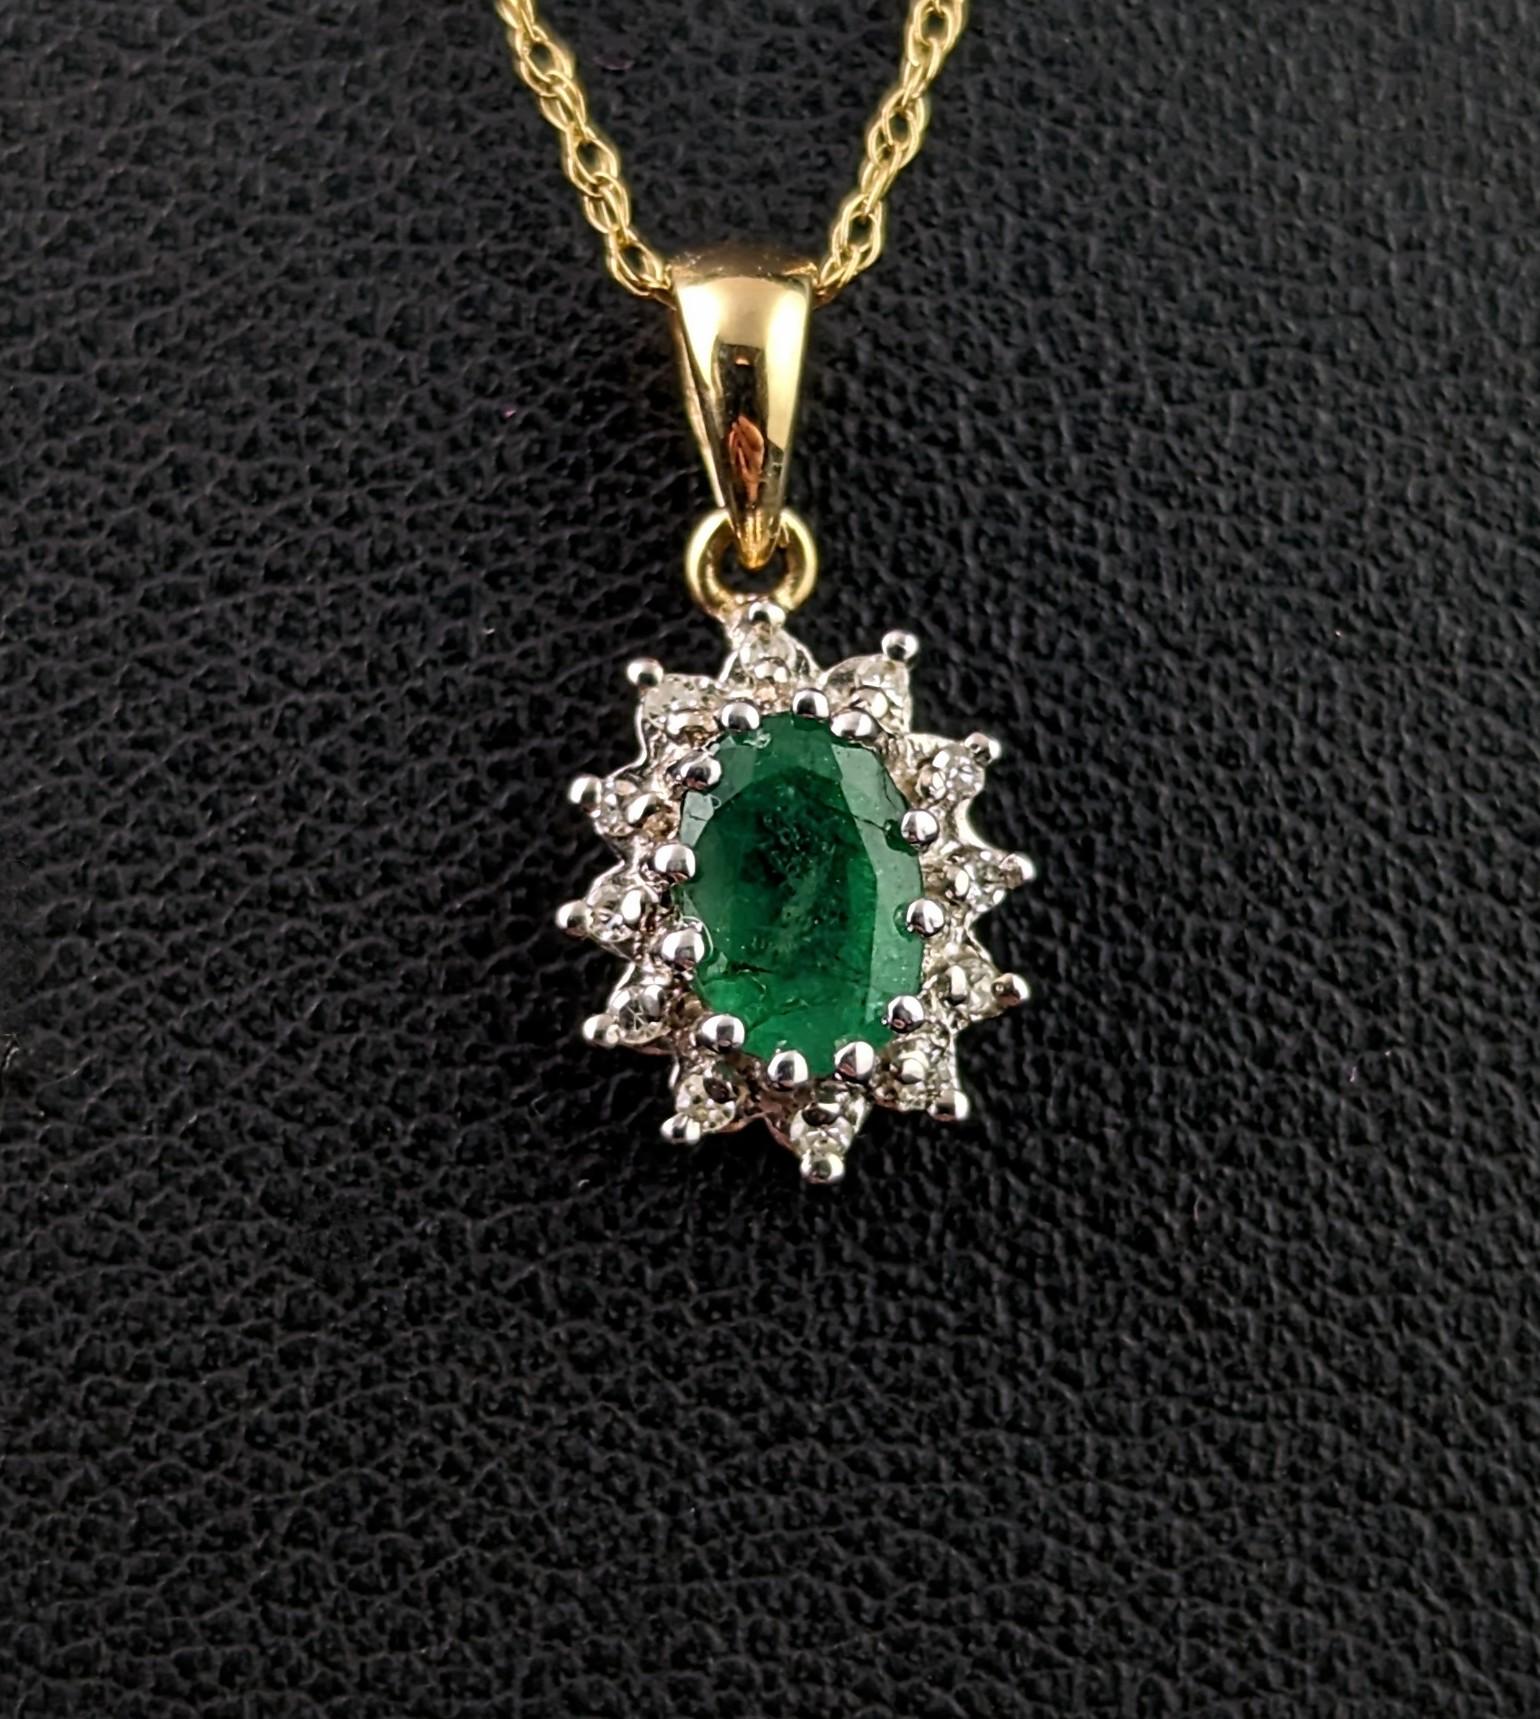 The sweetest little vintage Emerald and Diamond oval shaped cluster pendant in 9ct yellow gold.

The emerald has a lovely rich green hue and is an oval cut, surrounding the emerald is a halo of white gold set with tiny diamond chips.

All set into